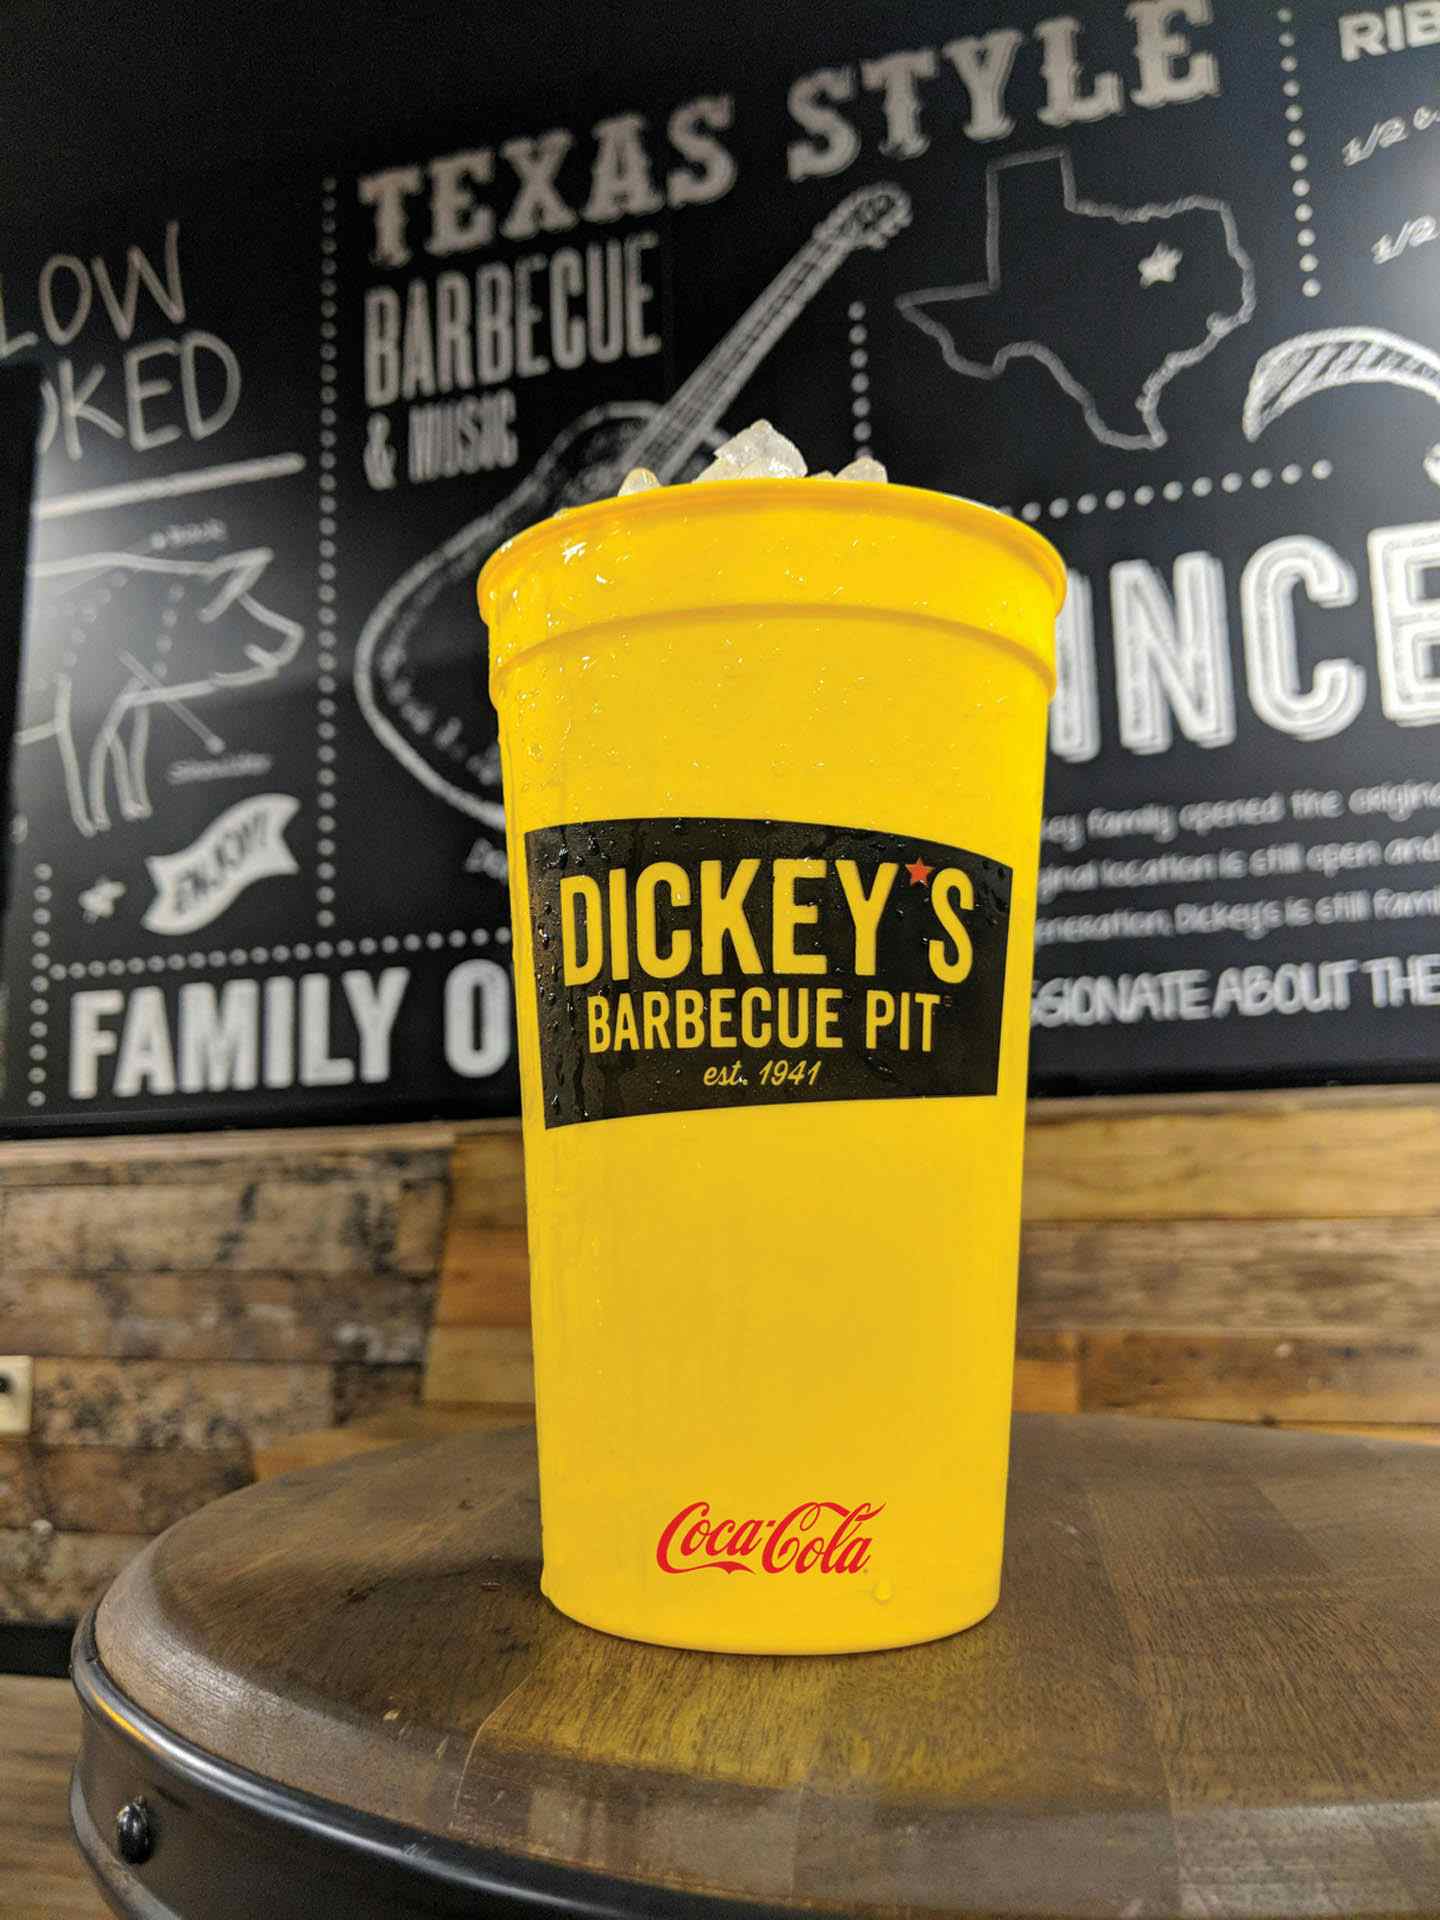 Franchising.com: Dickey's Barbecue Pit Announces $1 Iconic Big Yellow Cups